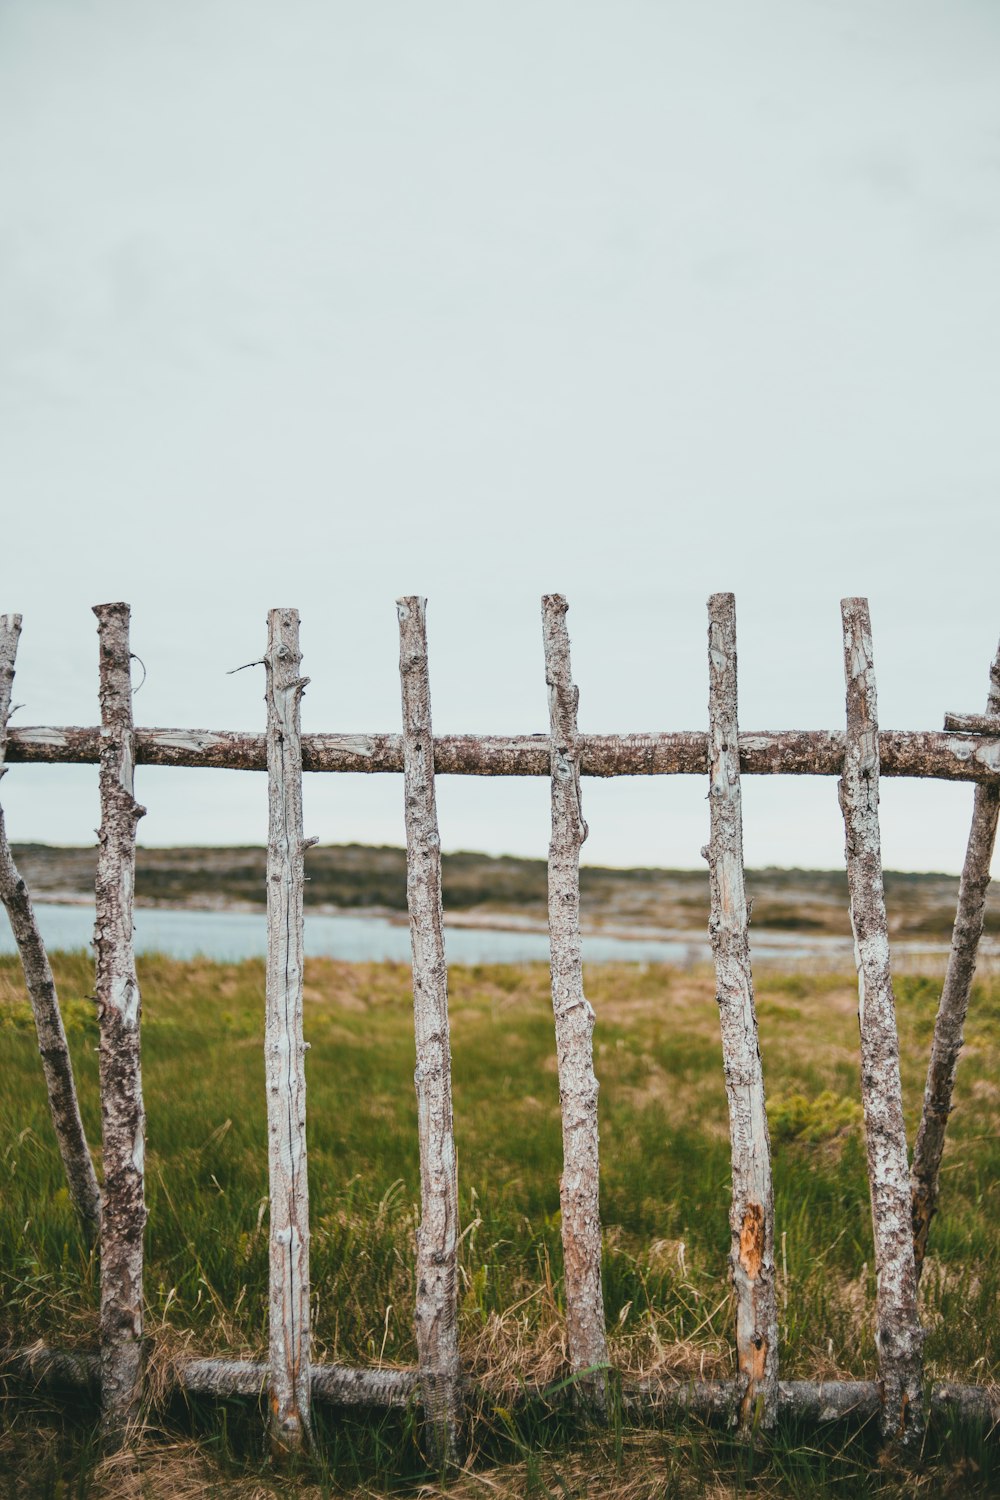 an old wooden fence in a grassy field